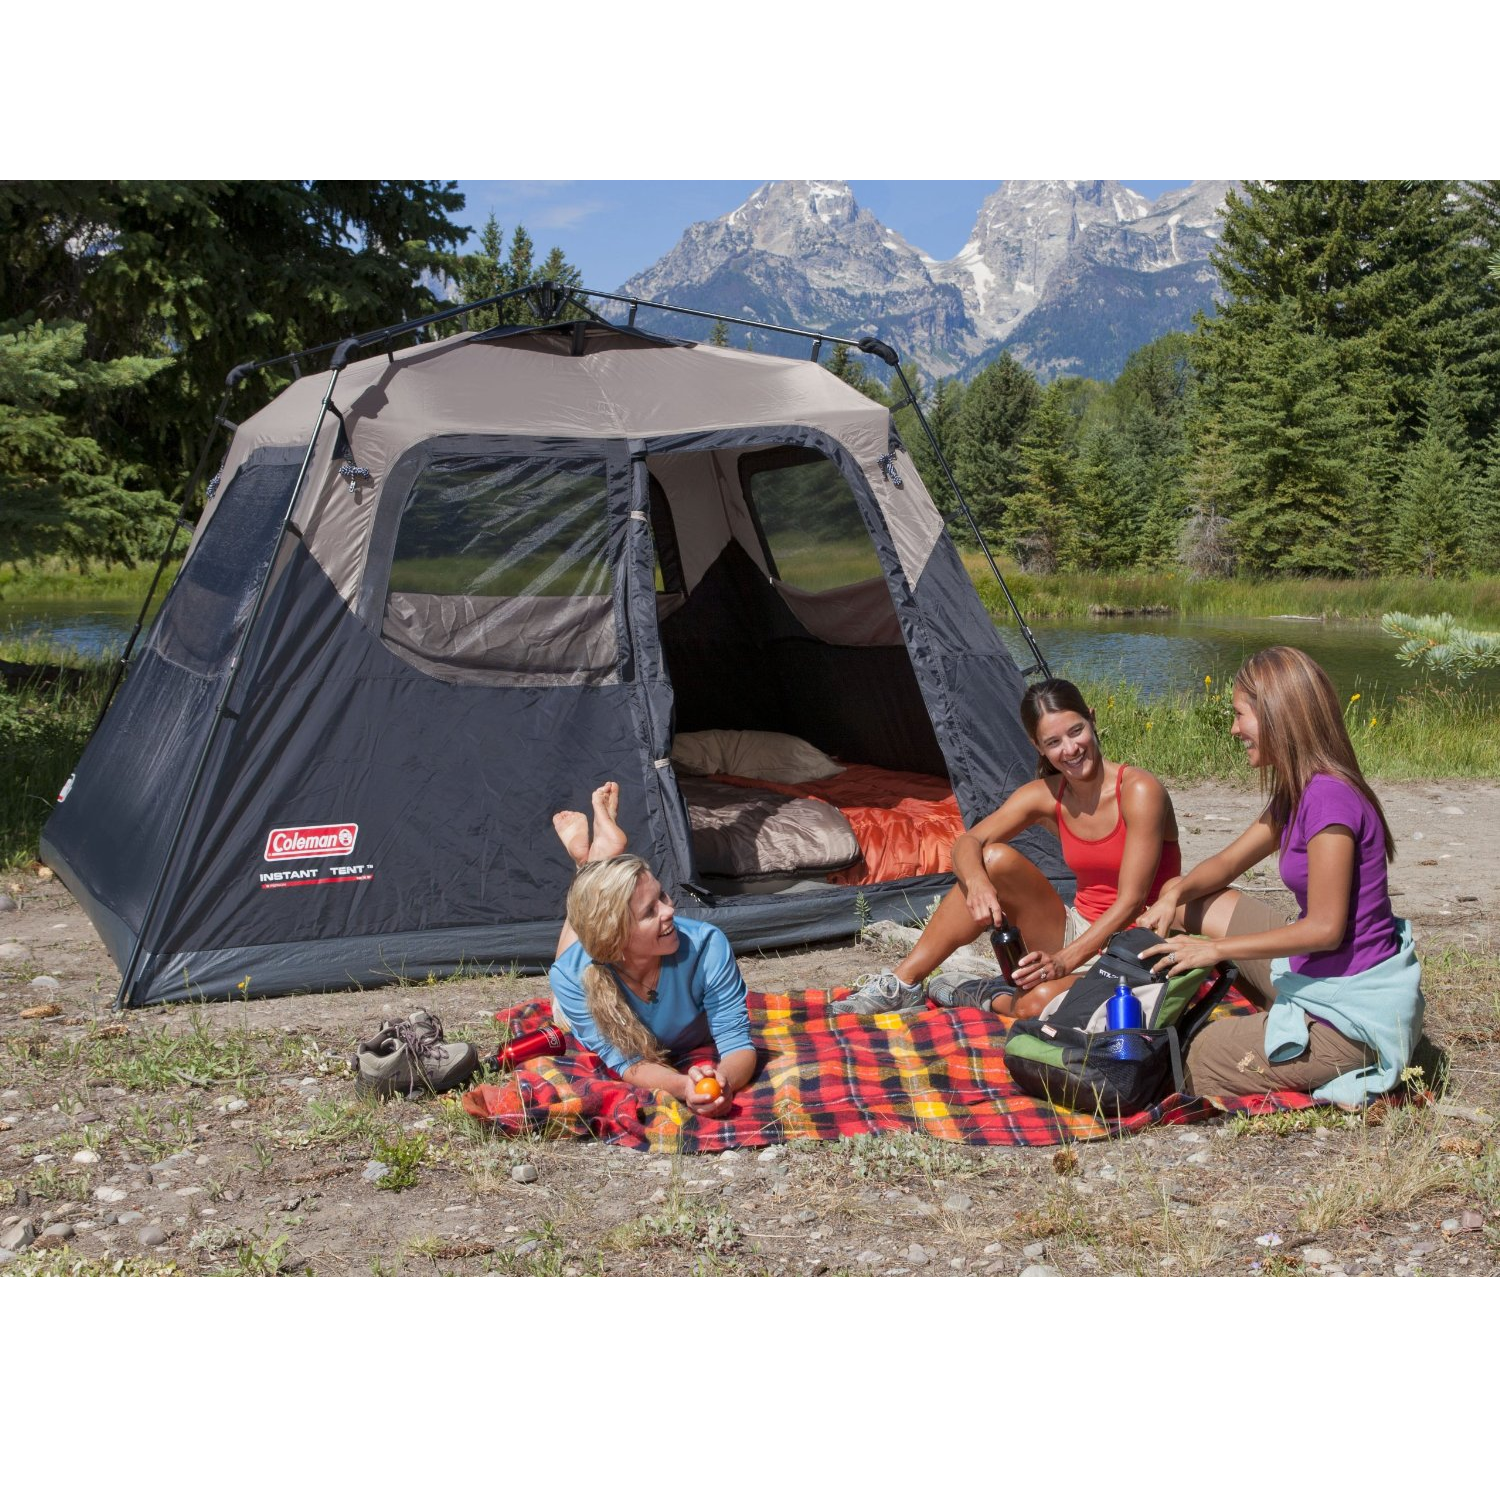 Coleman 6-Person Instant Cabin Only $104.94! (Reg $179.99)